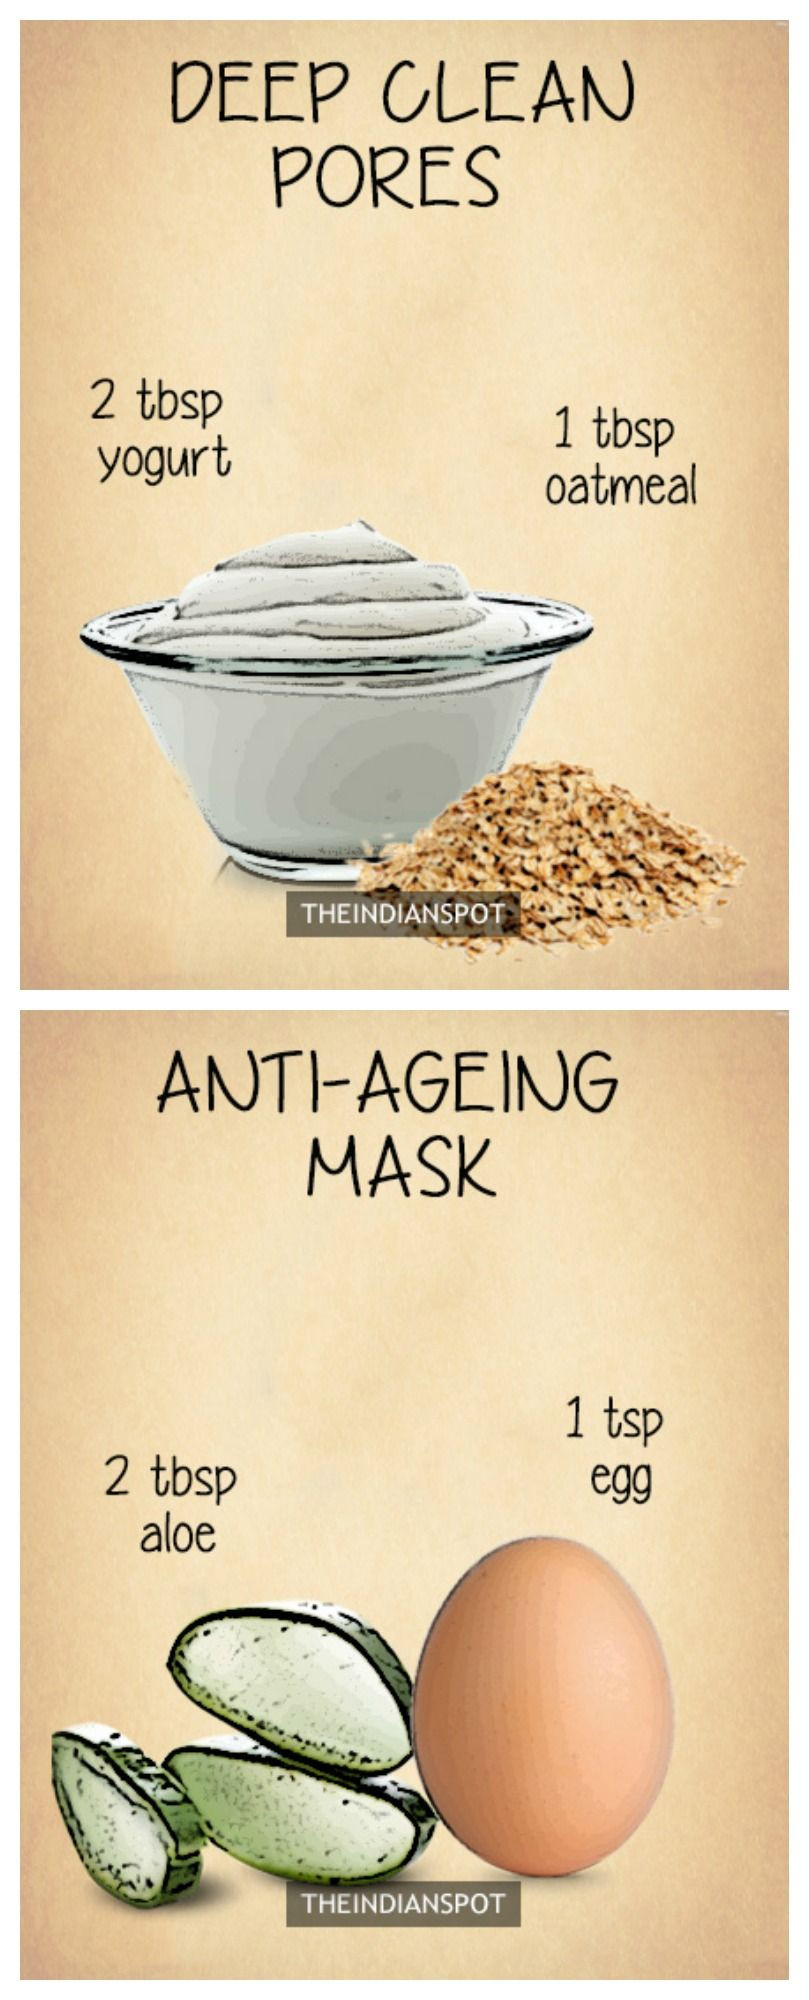 DIY Overnight Face Mask For Acne
 10 Amazing 2 ingre nts all natural homemade face masks